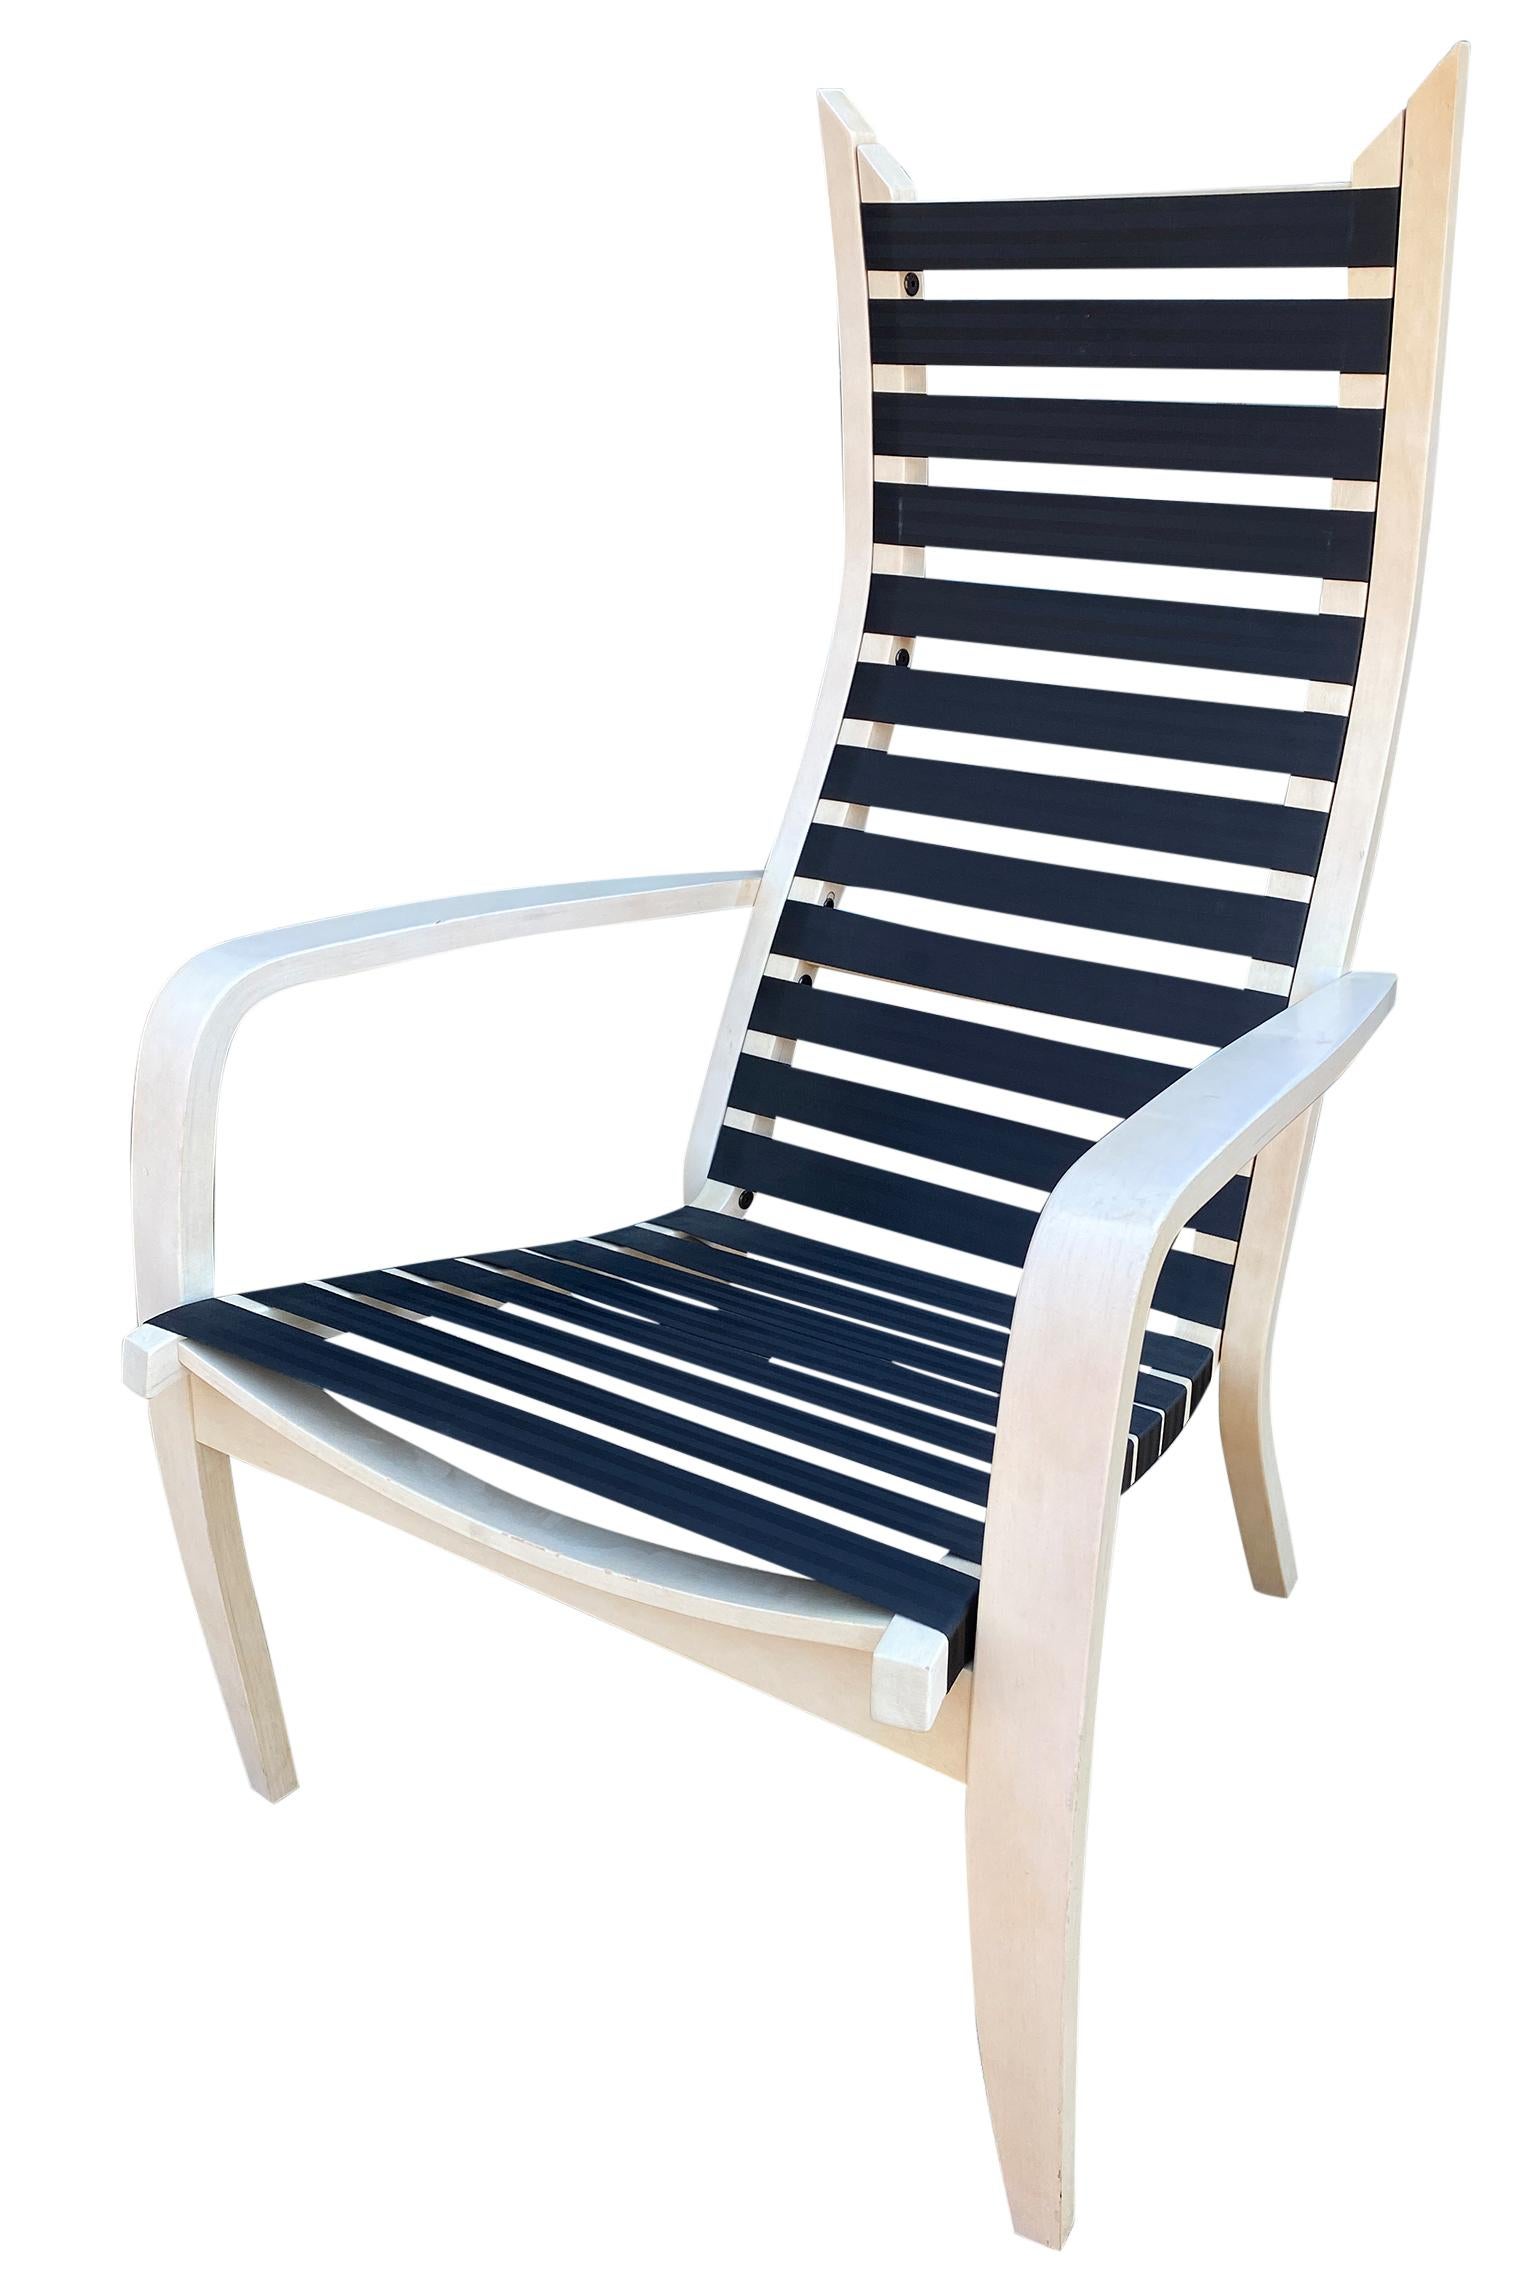 Peter Danko Design Gotham Lounge chair modern. Bent Birch wood - white washed with black Nylon straps. Excellent condition very rare and comfortable. Sold by J. Persing - Documented.